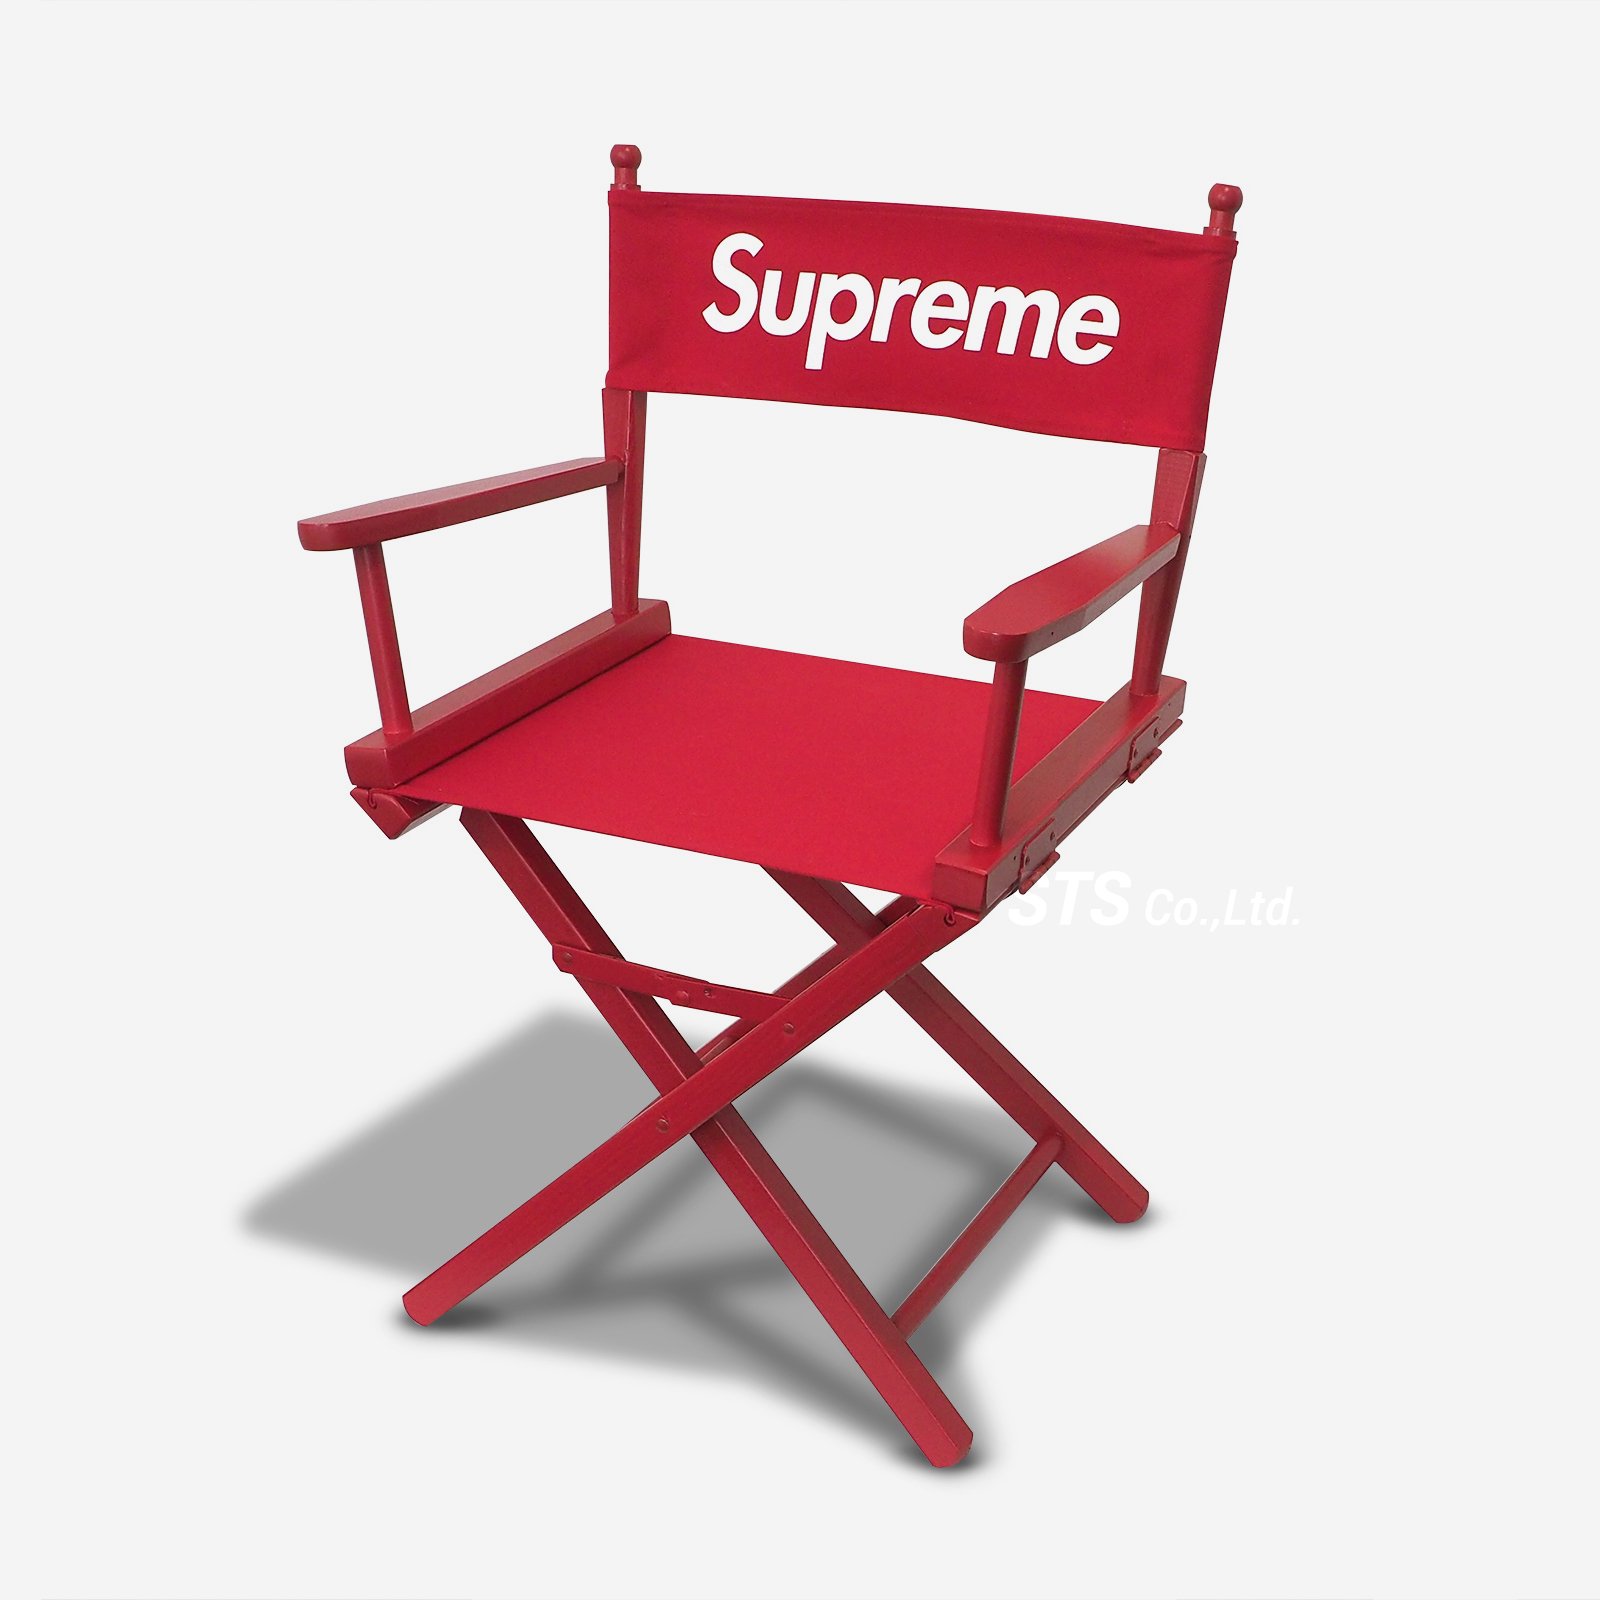 19SS Supreme Director's chair red シュプリーム www.krzysztofbialy.com